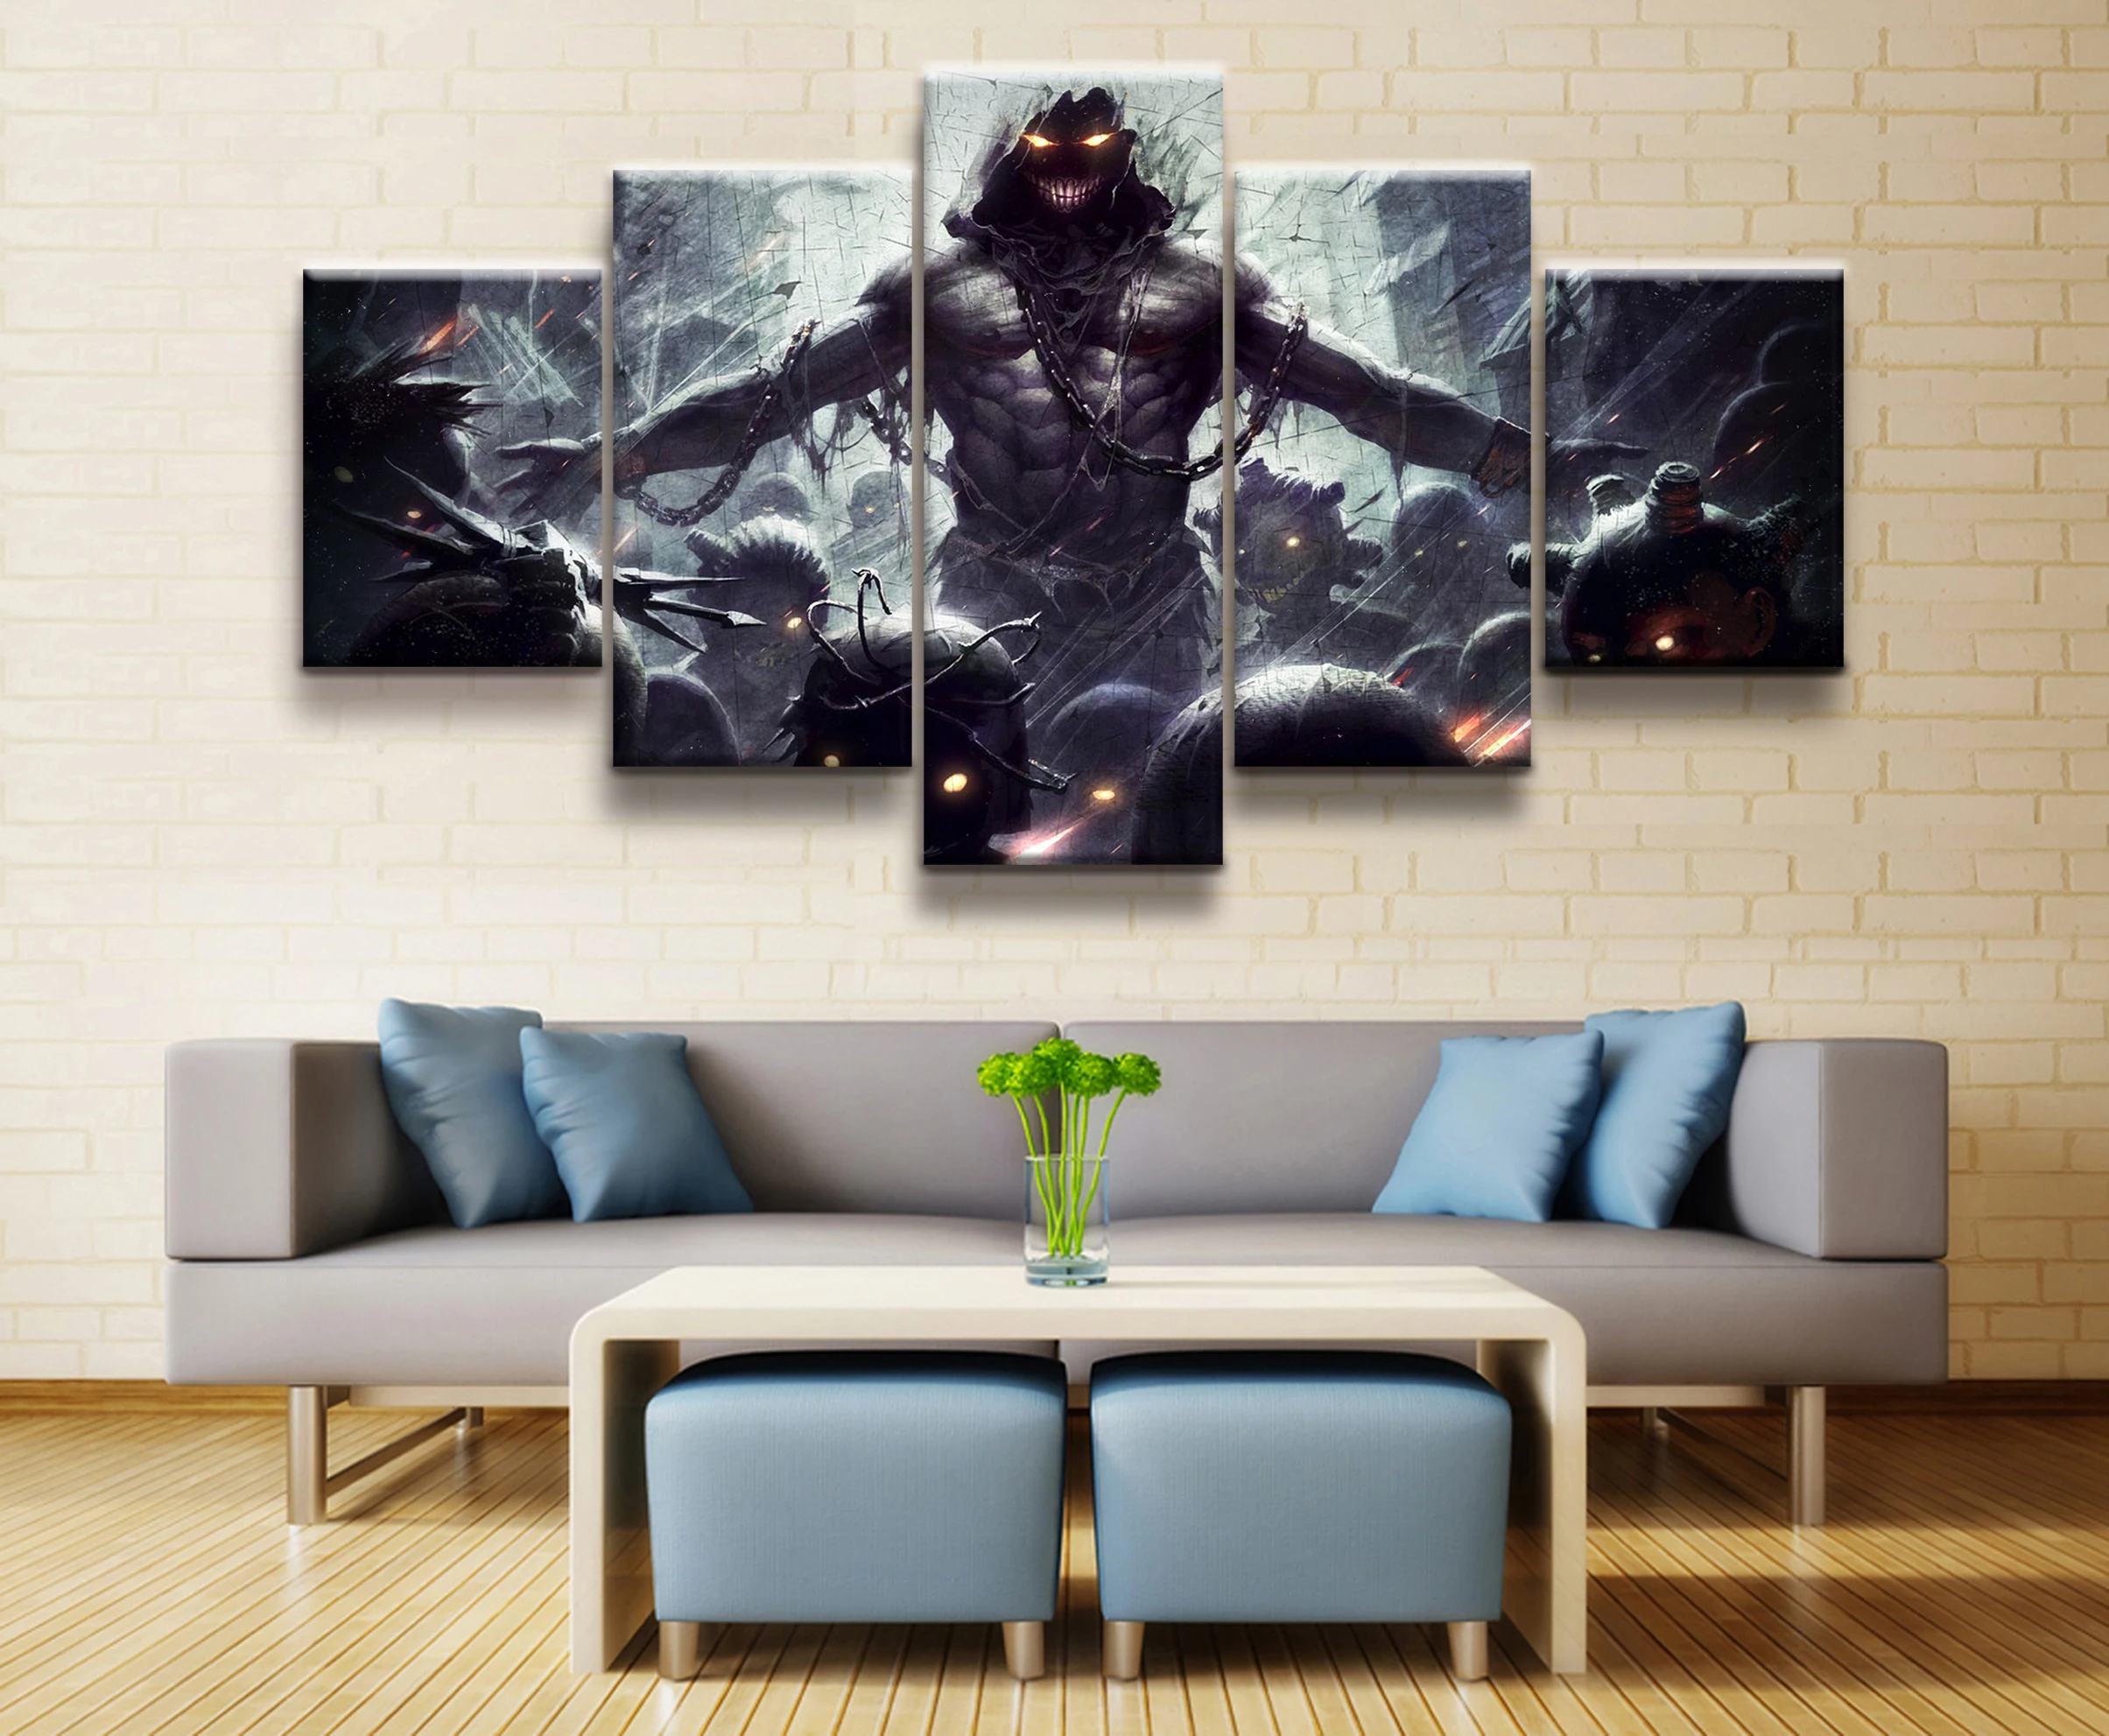 4 Panel My hero Academy Anime poster Canvas Printed Painting For Living Room Wall Art Decor Picture Artworks Poster